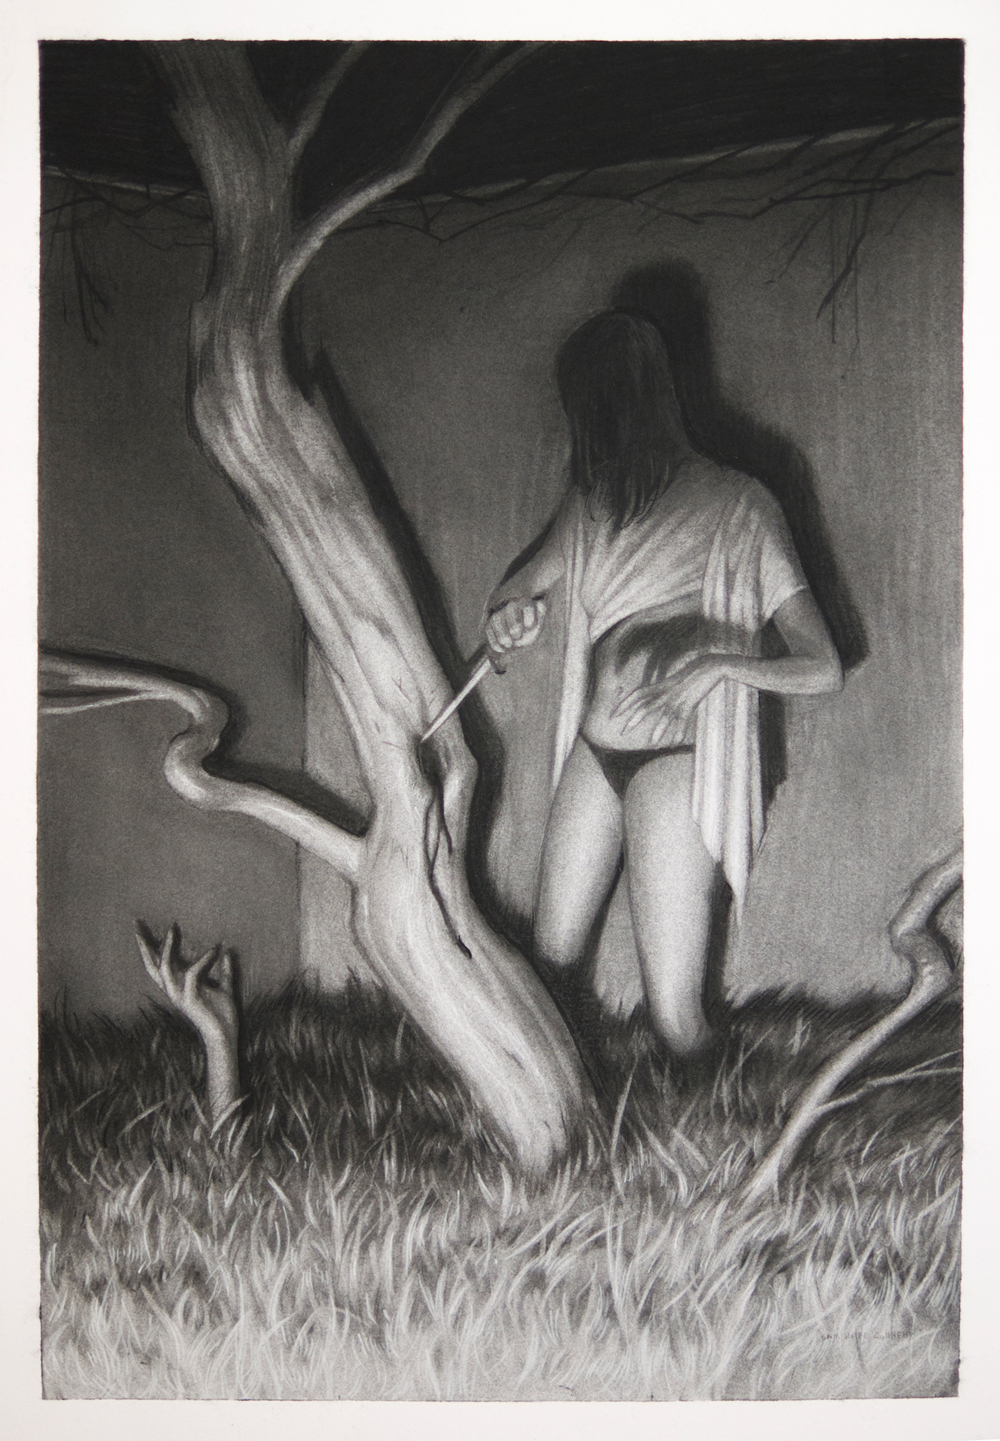 Witch of Branches - A Graphite Illustration by Sam Wolfe Connelly - Lore @ Hashimoto Gallery